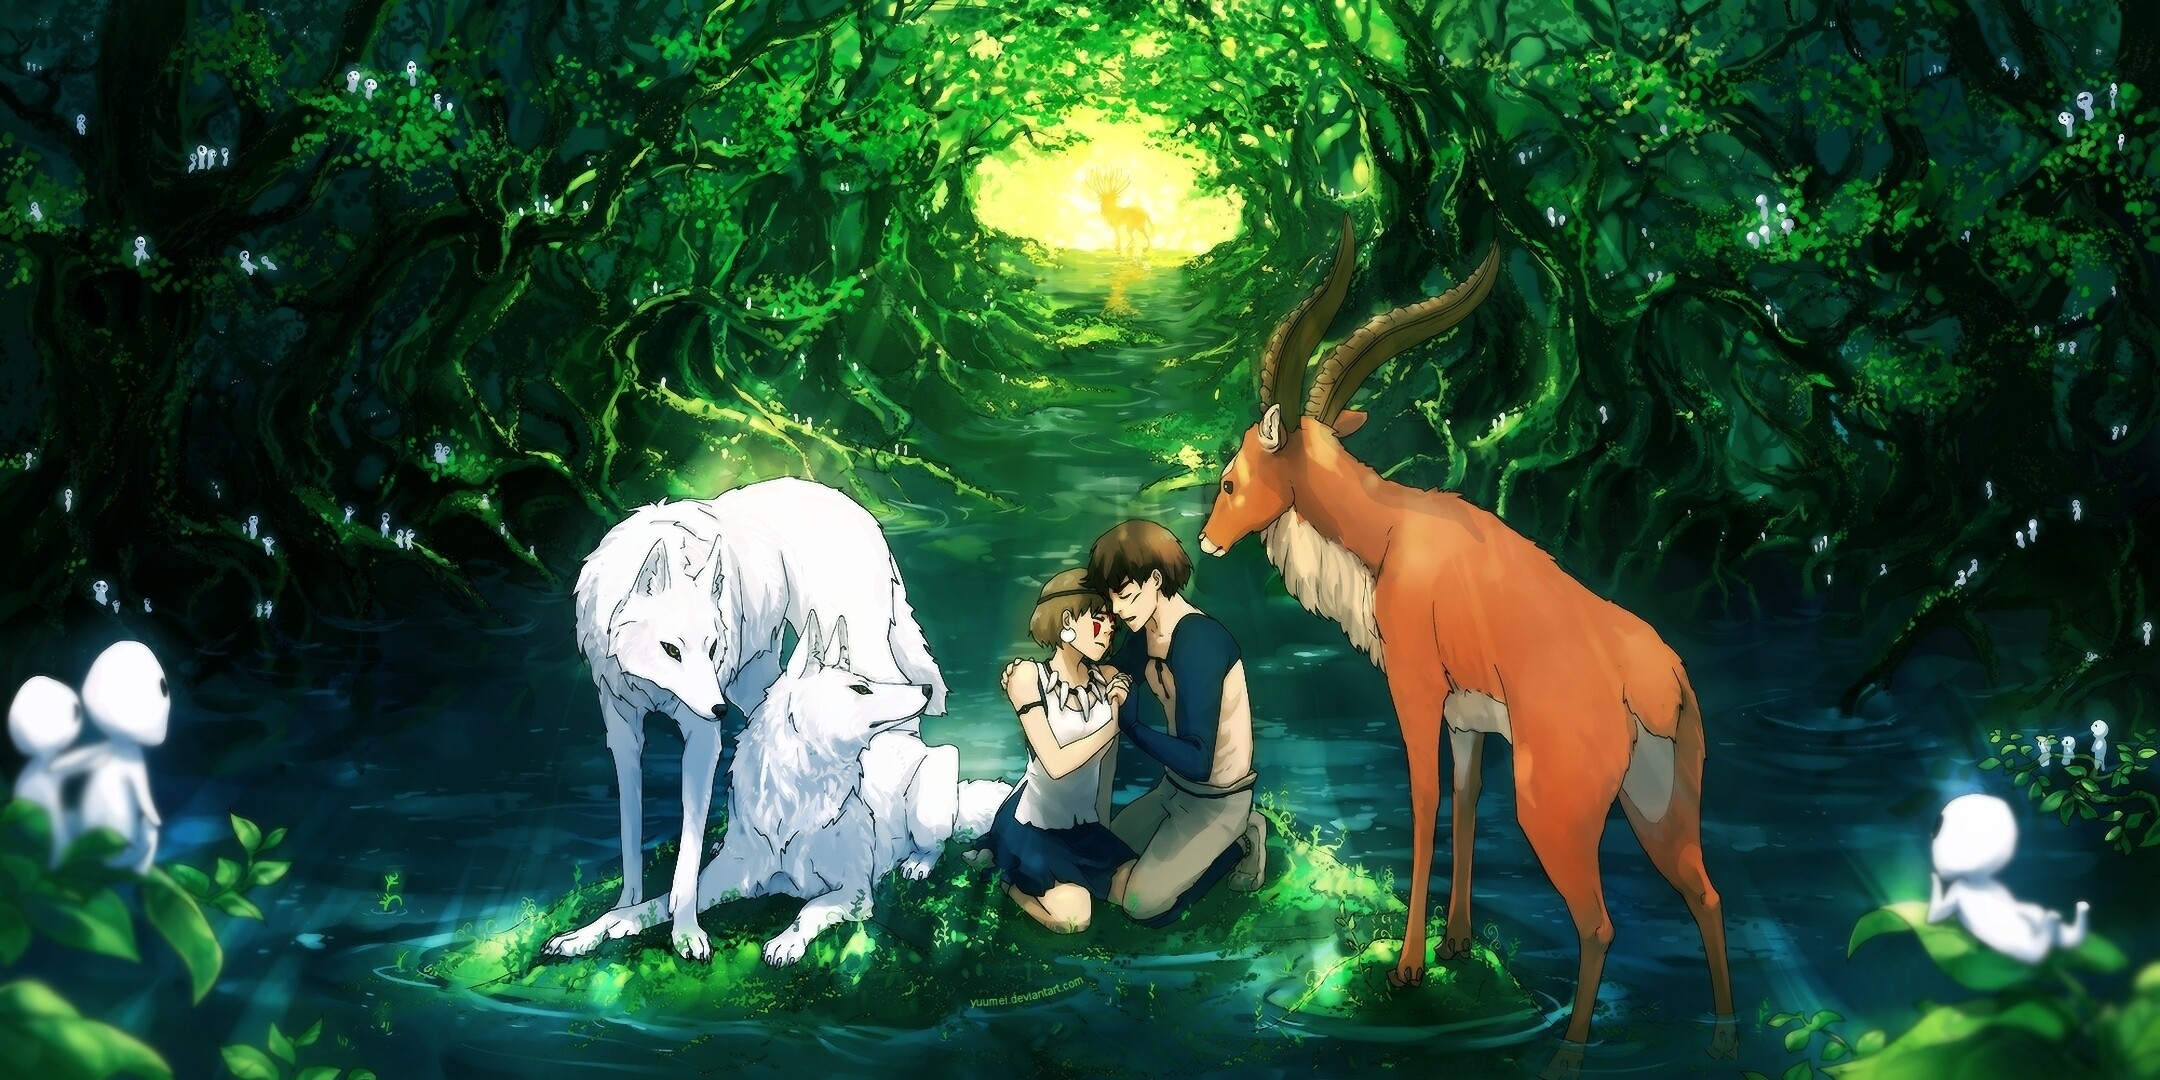 Princess Mononoke: The story follows a young Emishi prince named Ashitaka, A struggle between the gods of a forest and the humans. 2160x1080 Dual Screen Background.